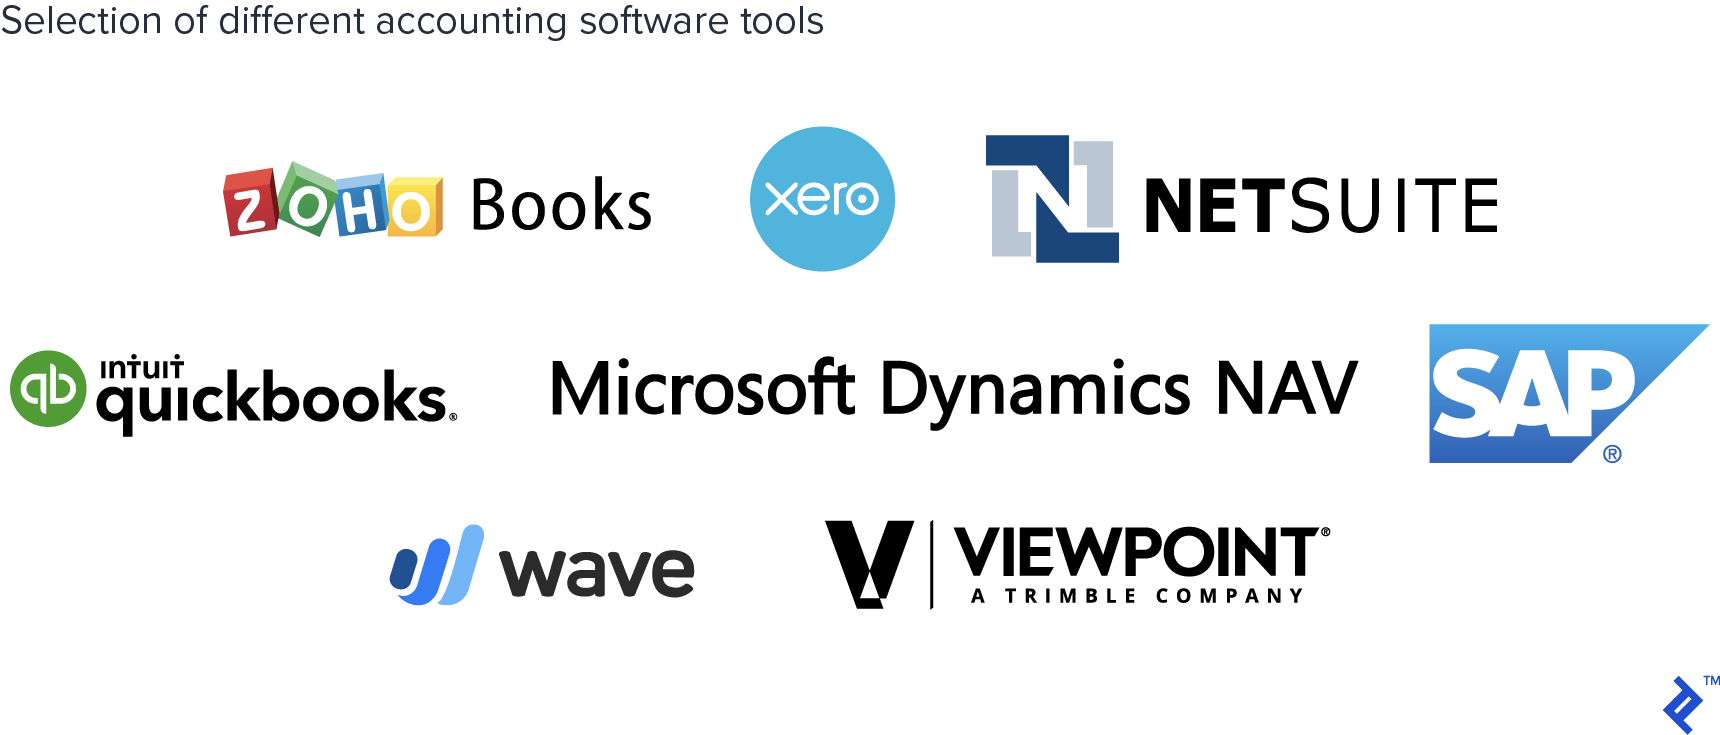 Selection of different accounting software tools